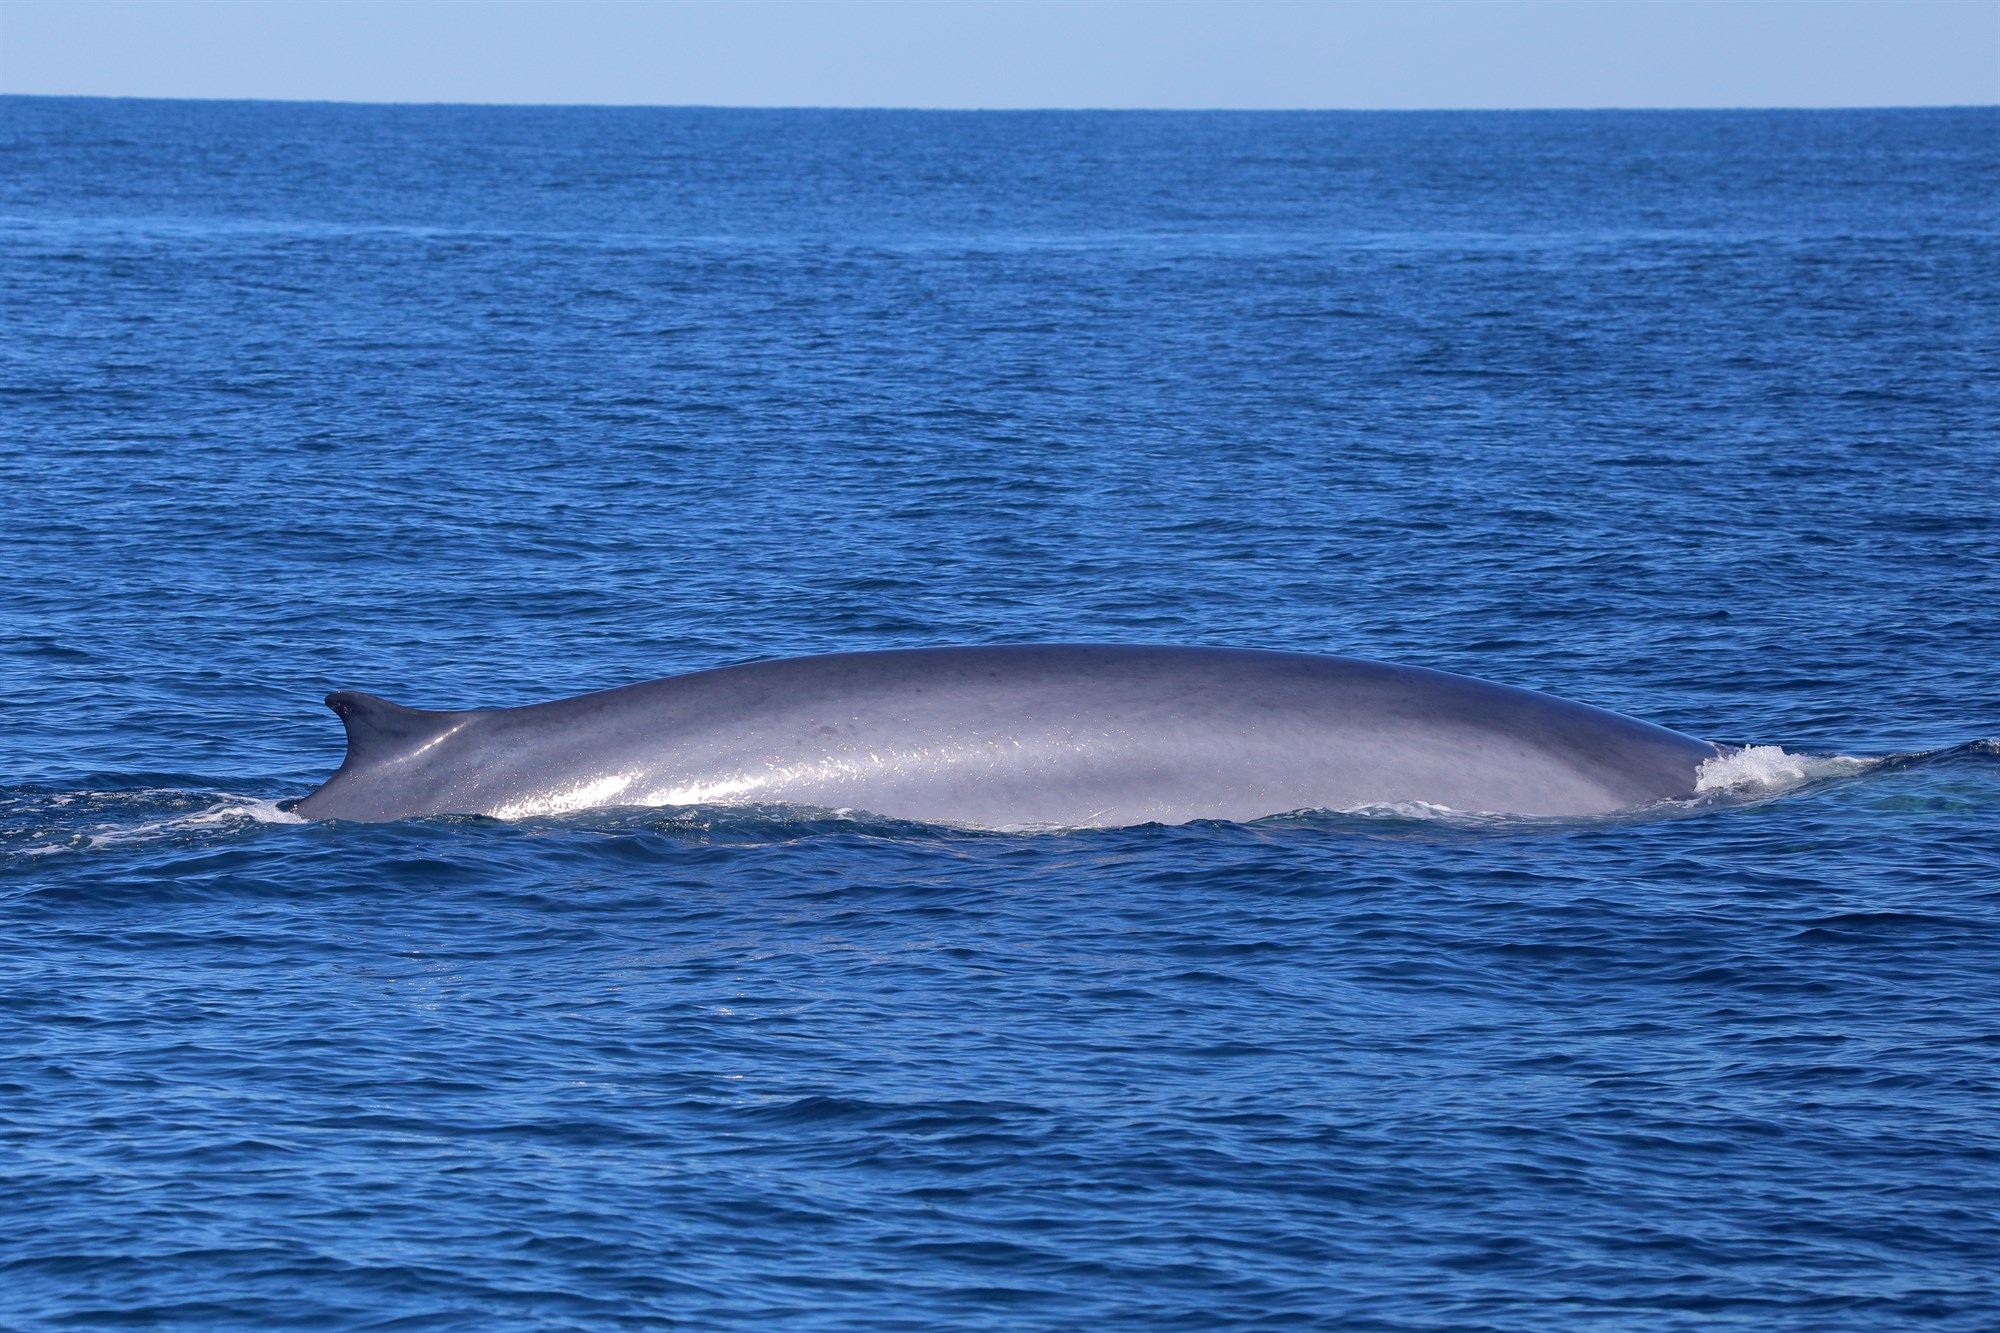 A fin whale jumping out of the water